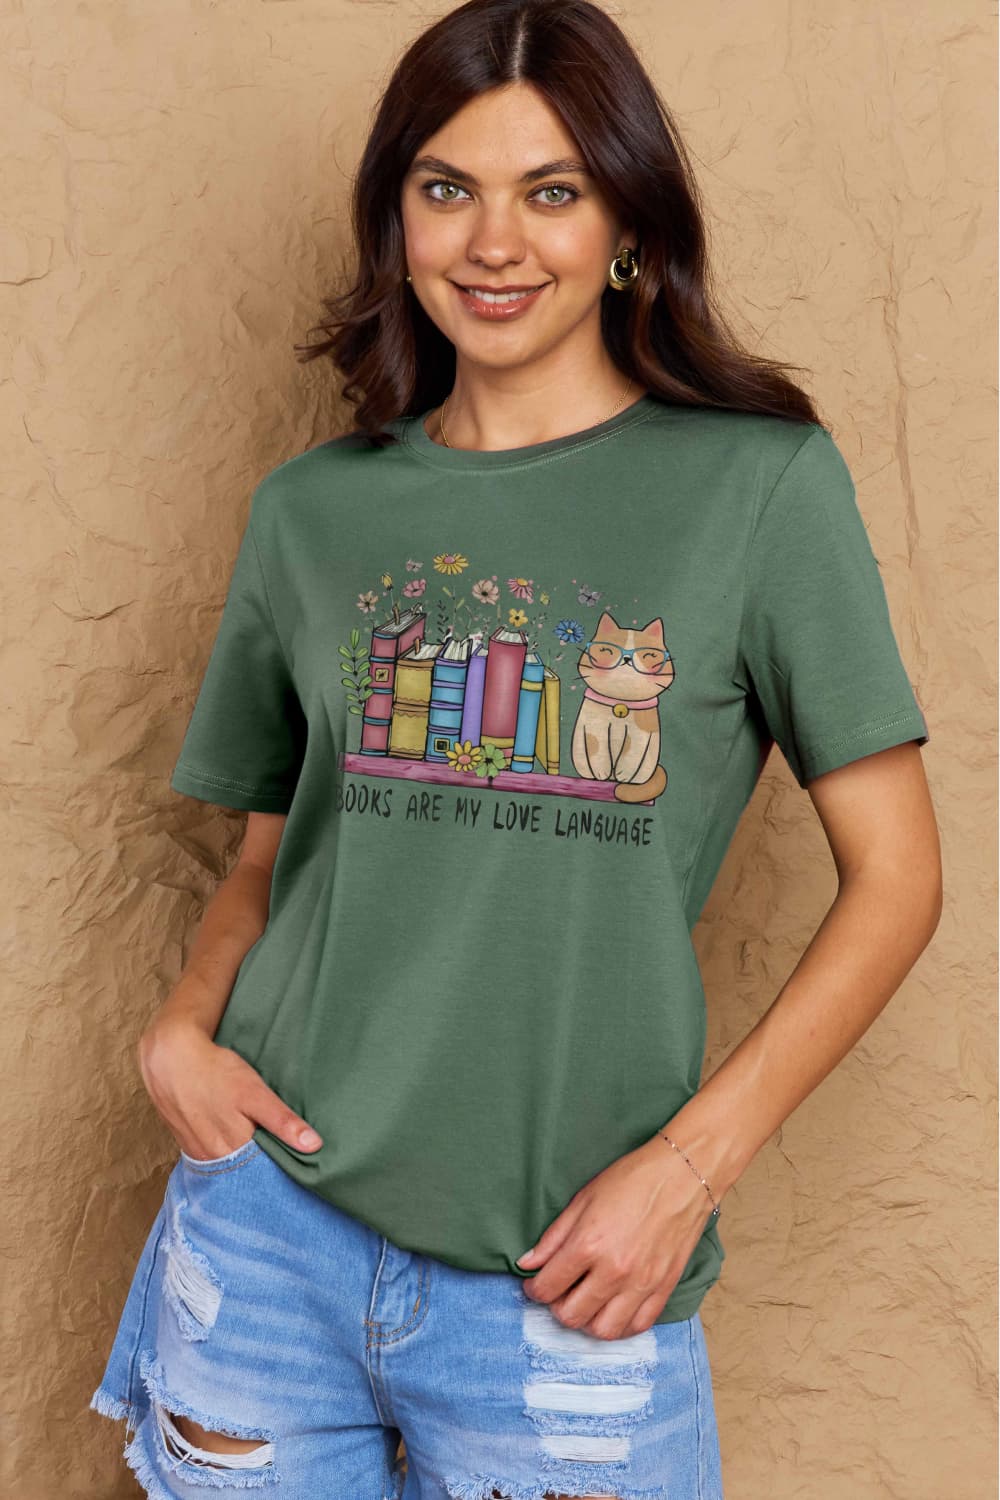 Simply Love Full Size BOOKS ARE MY LOVE LANGUAGE Graphic Cotton Tee